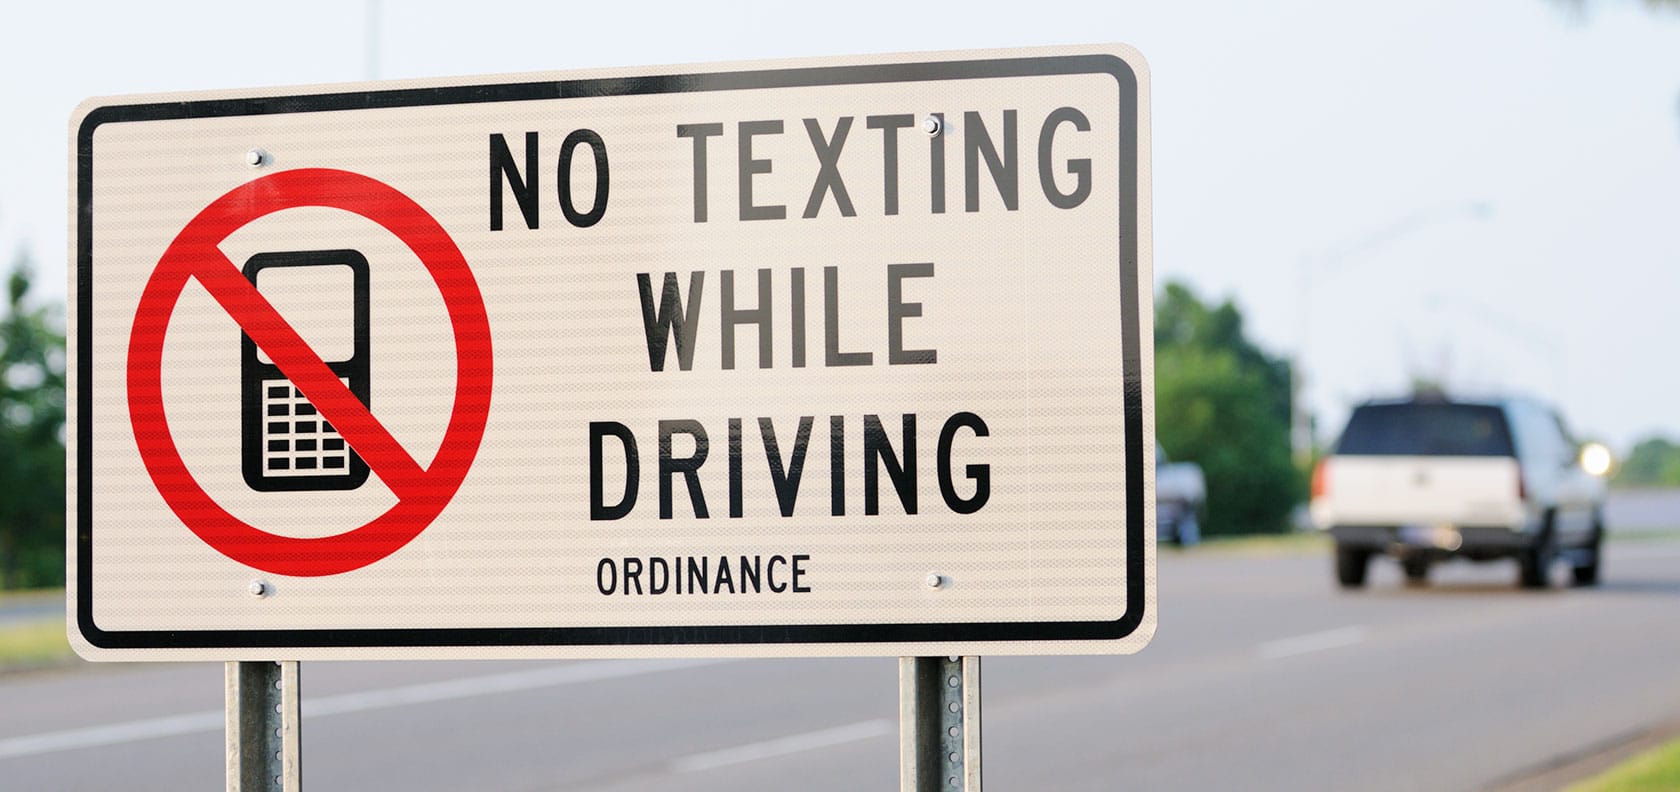 Traffic signal with "no texting while driving" message